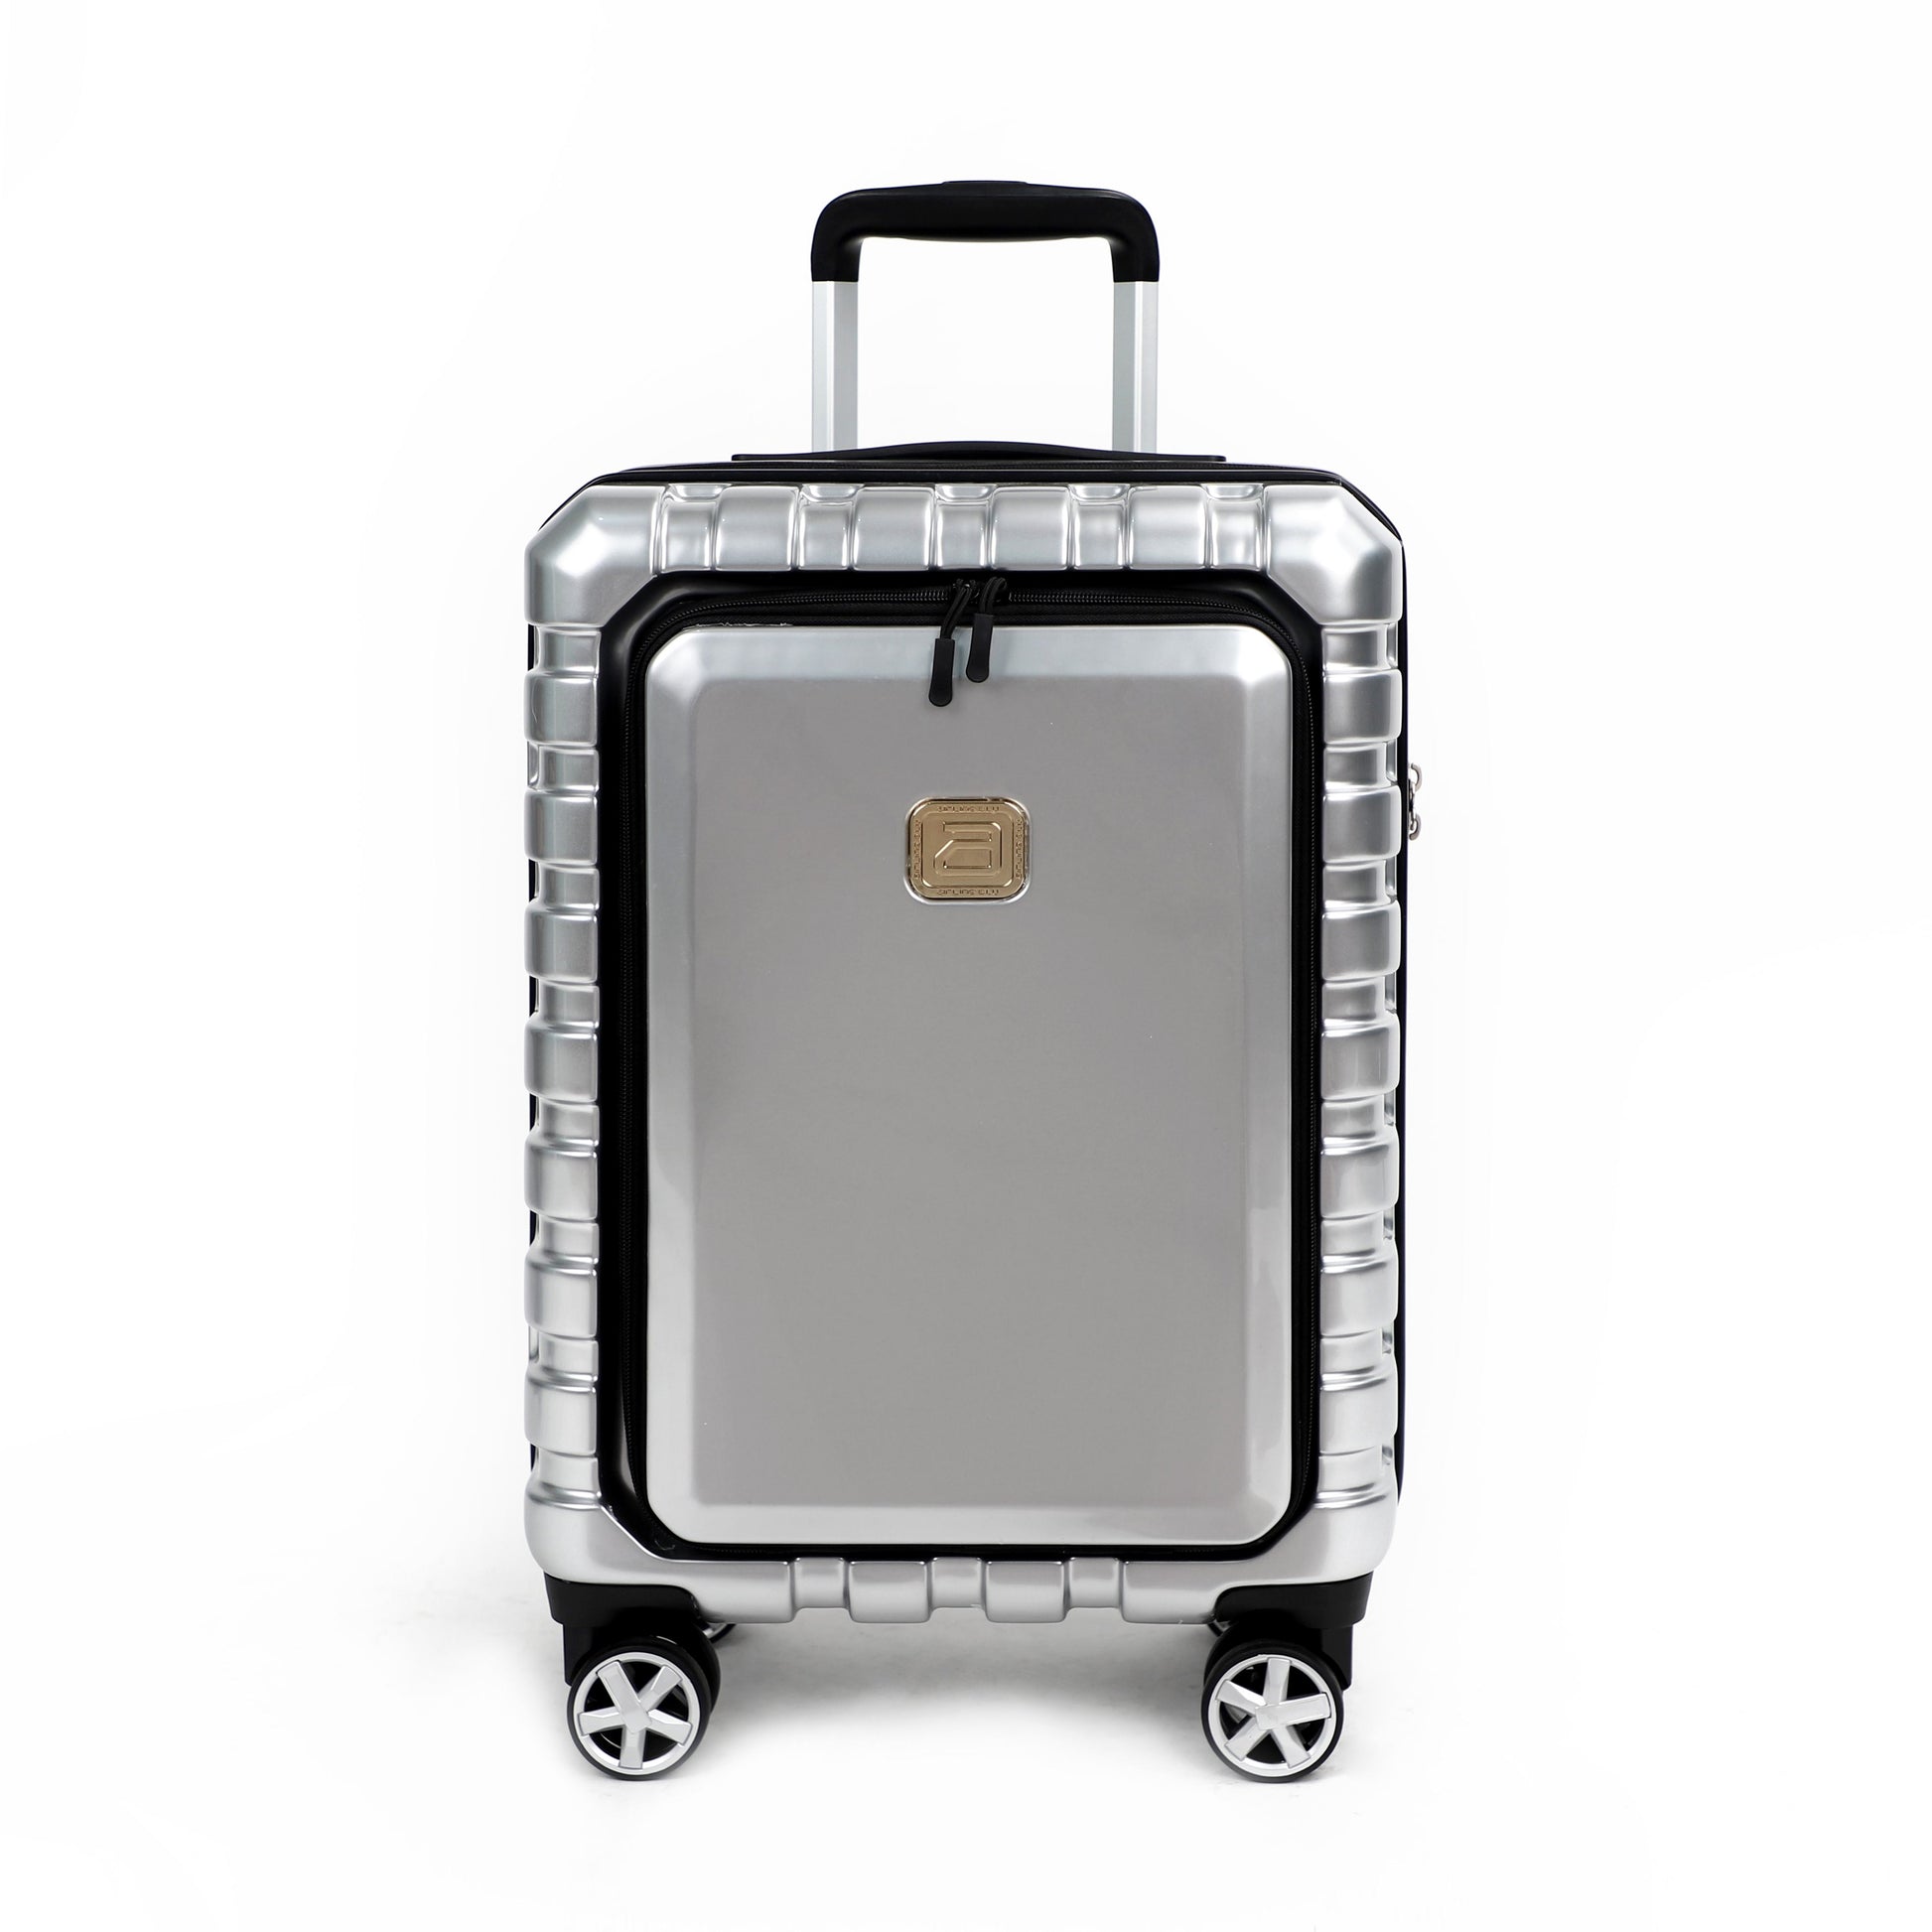 Airline_Carry_On_Luggage_Silver_front_viewT1978155103